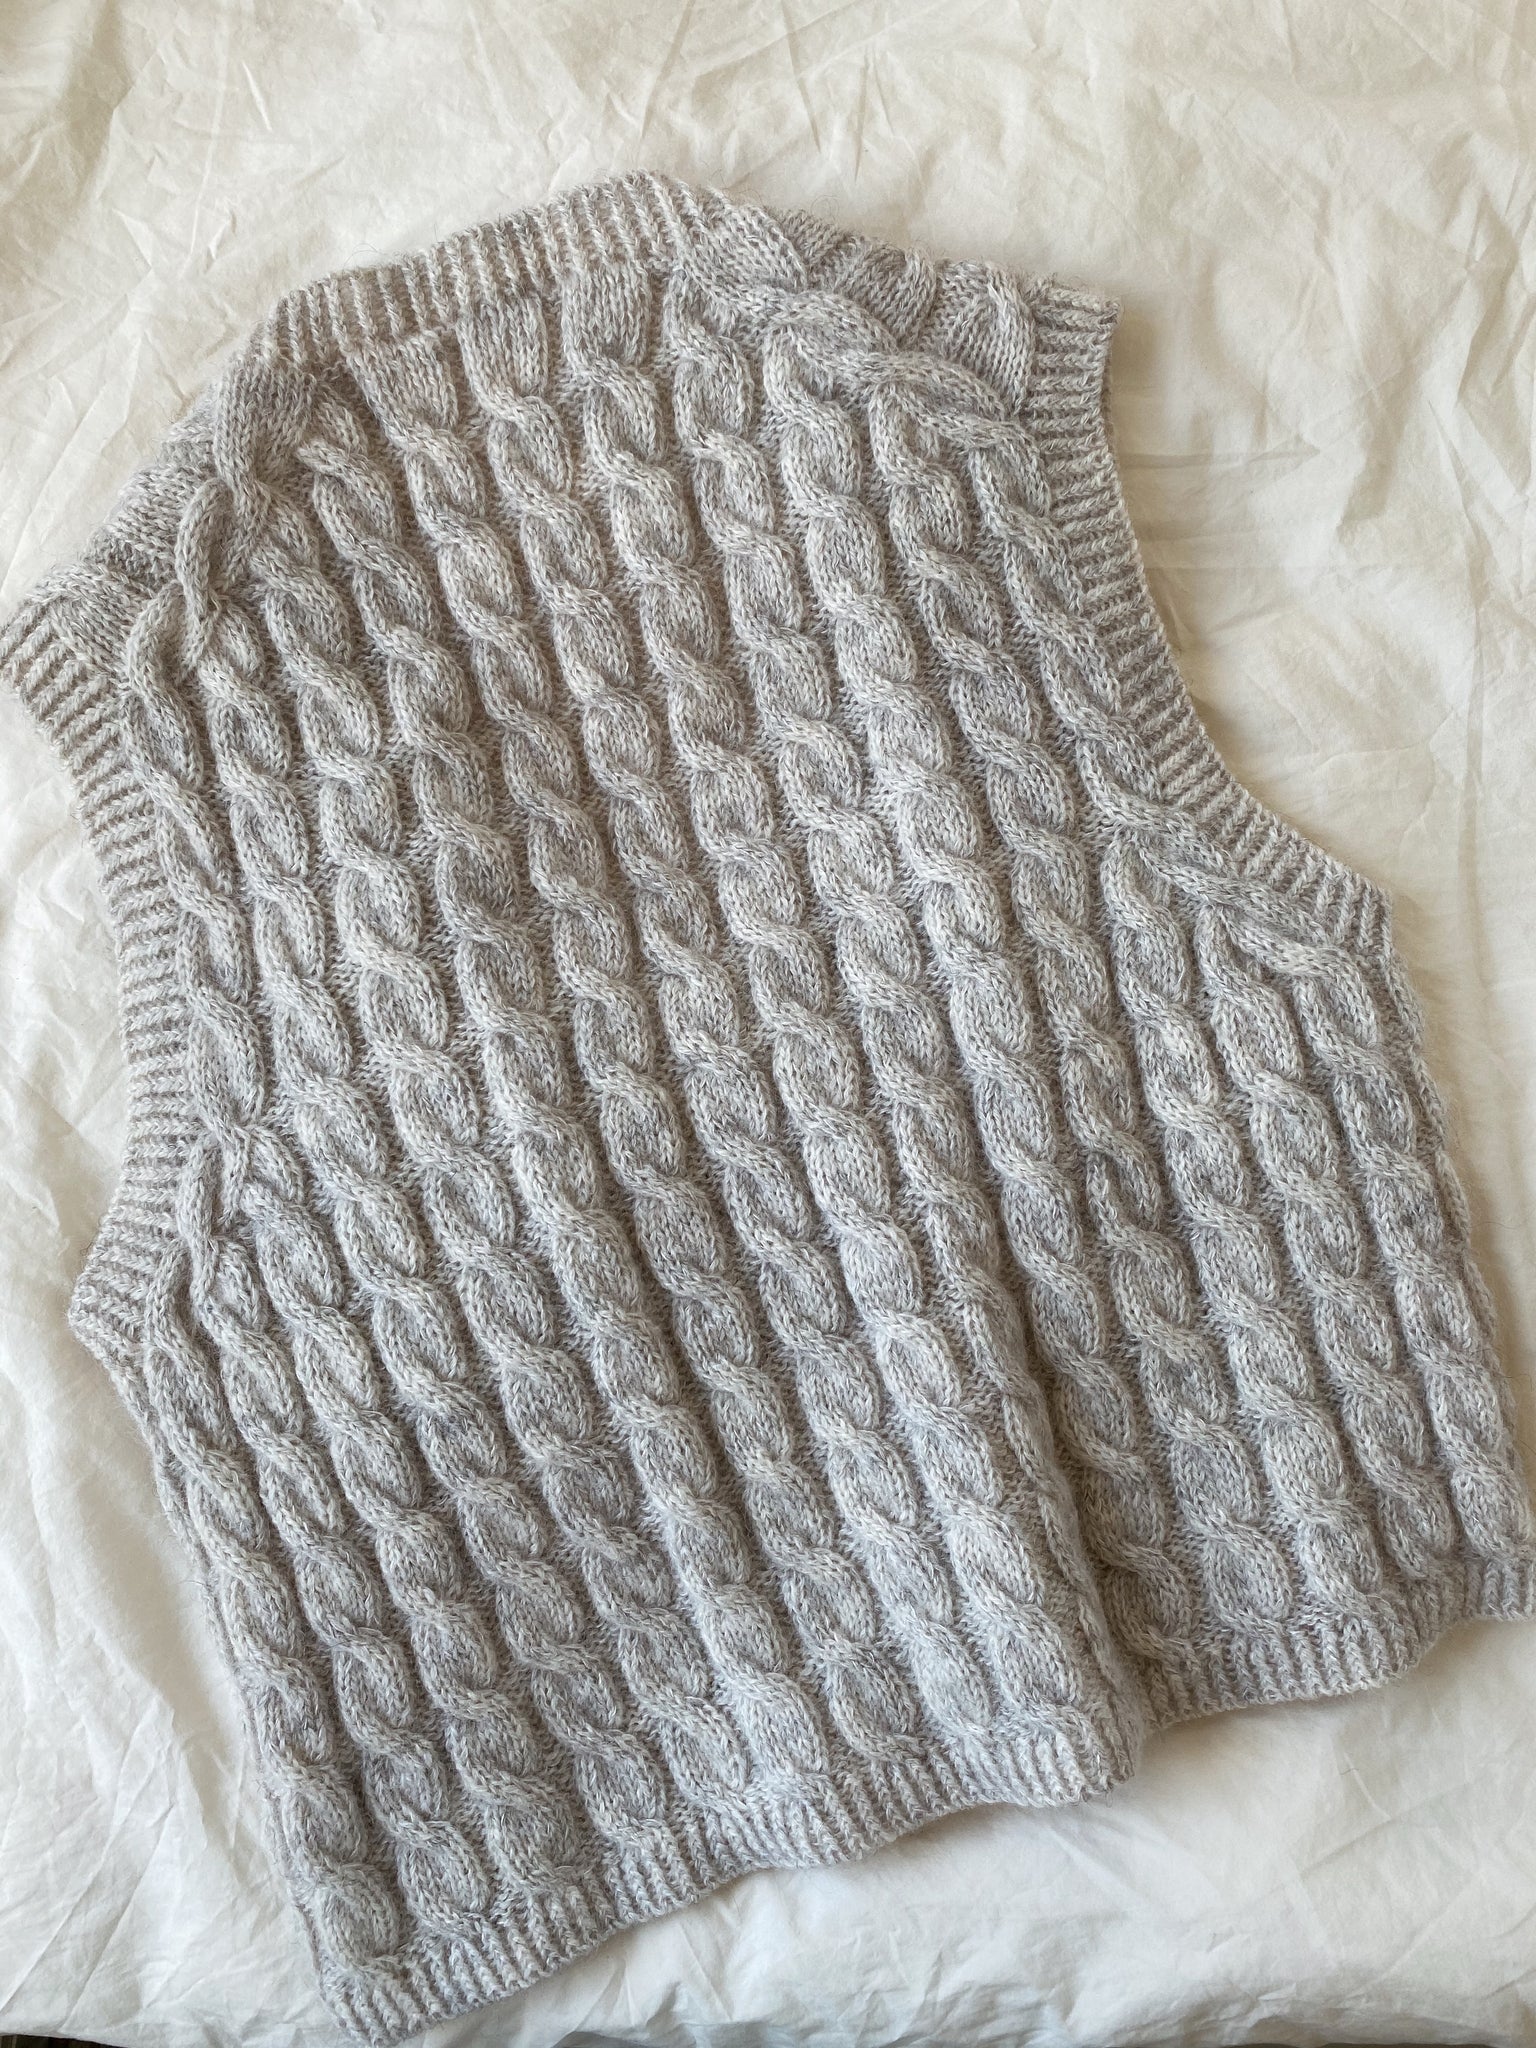 Vest No. 8 My Favourite Things Knitwear – Strickpaket